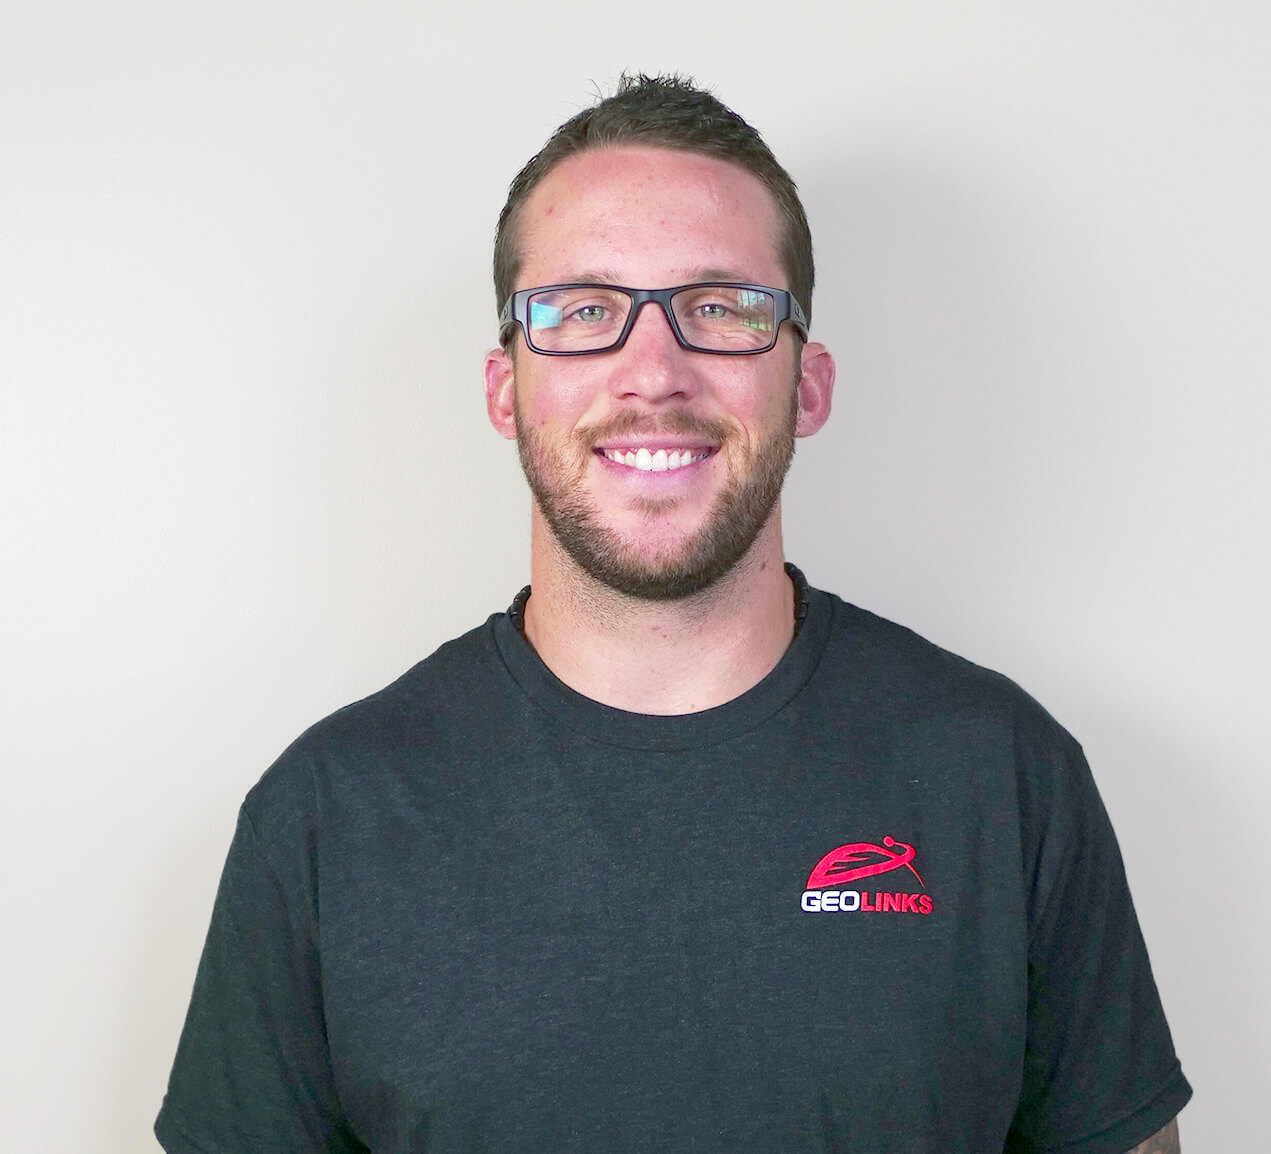 Get to know GeoLinks’ Client Consultant Dillon Lowen